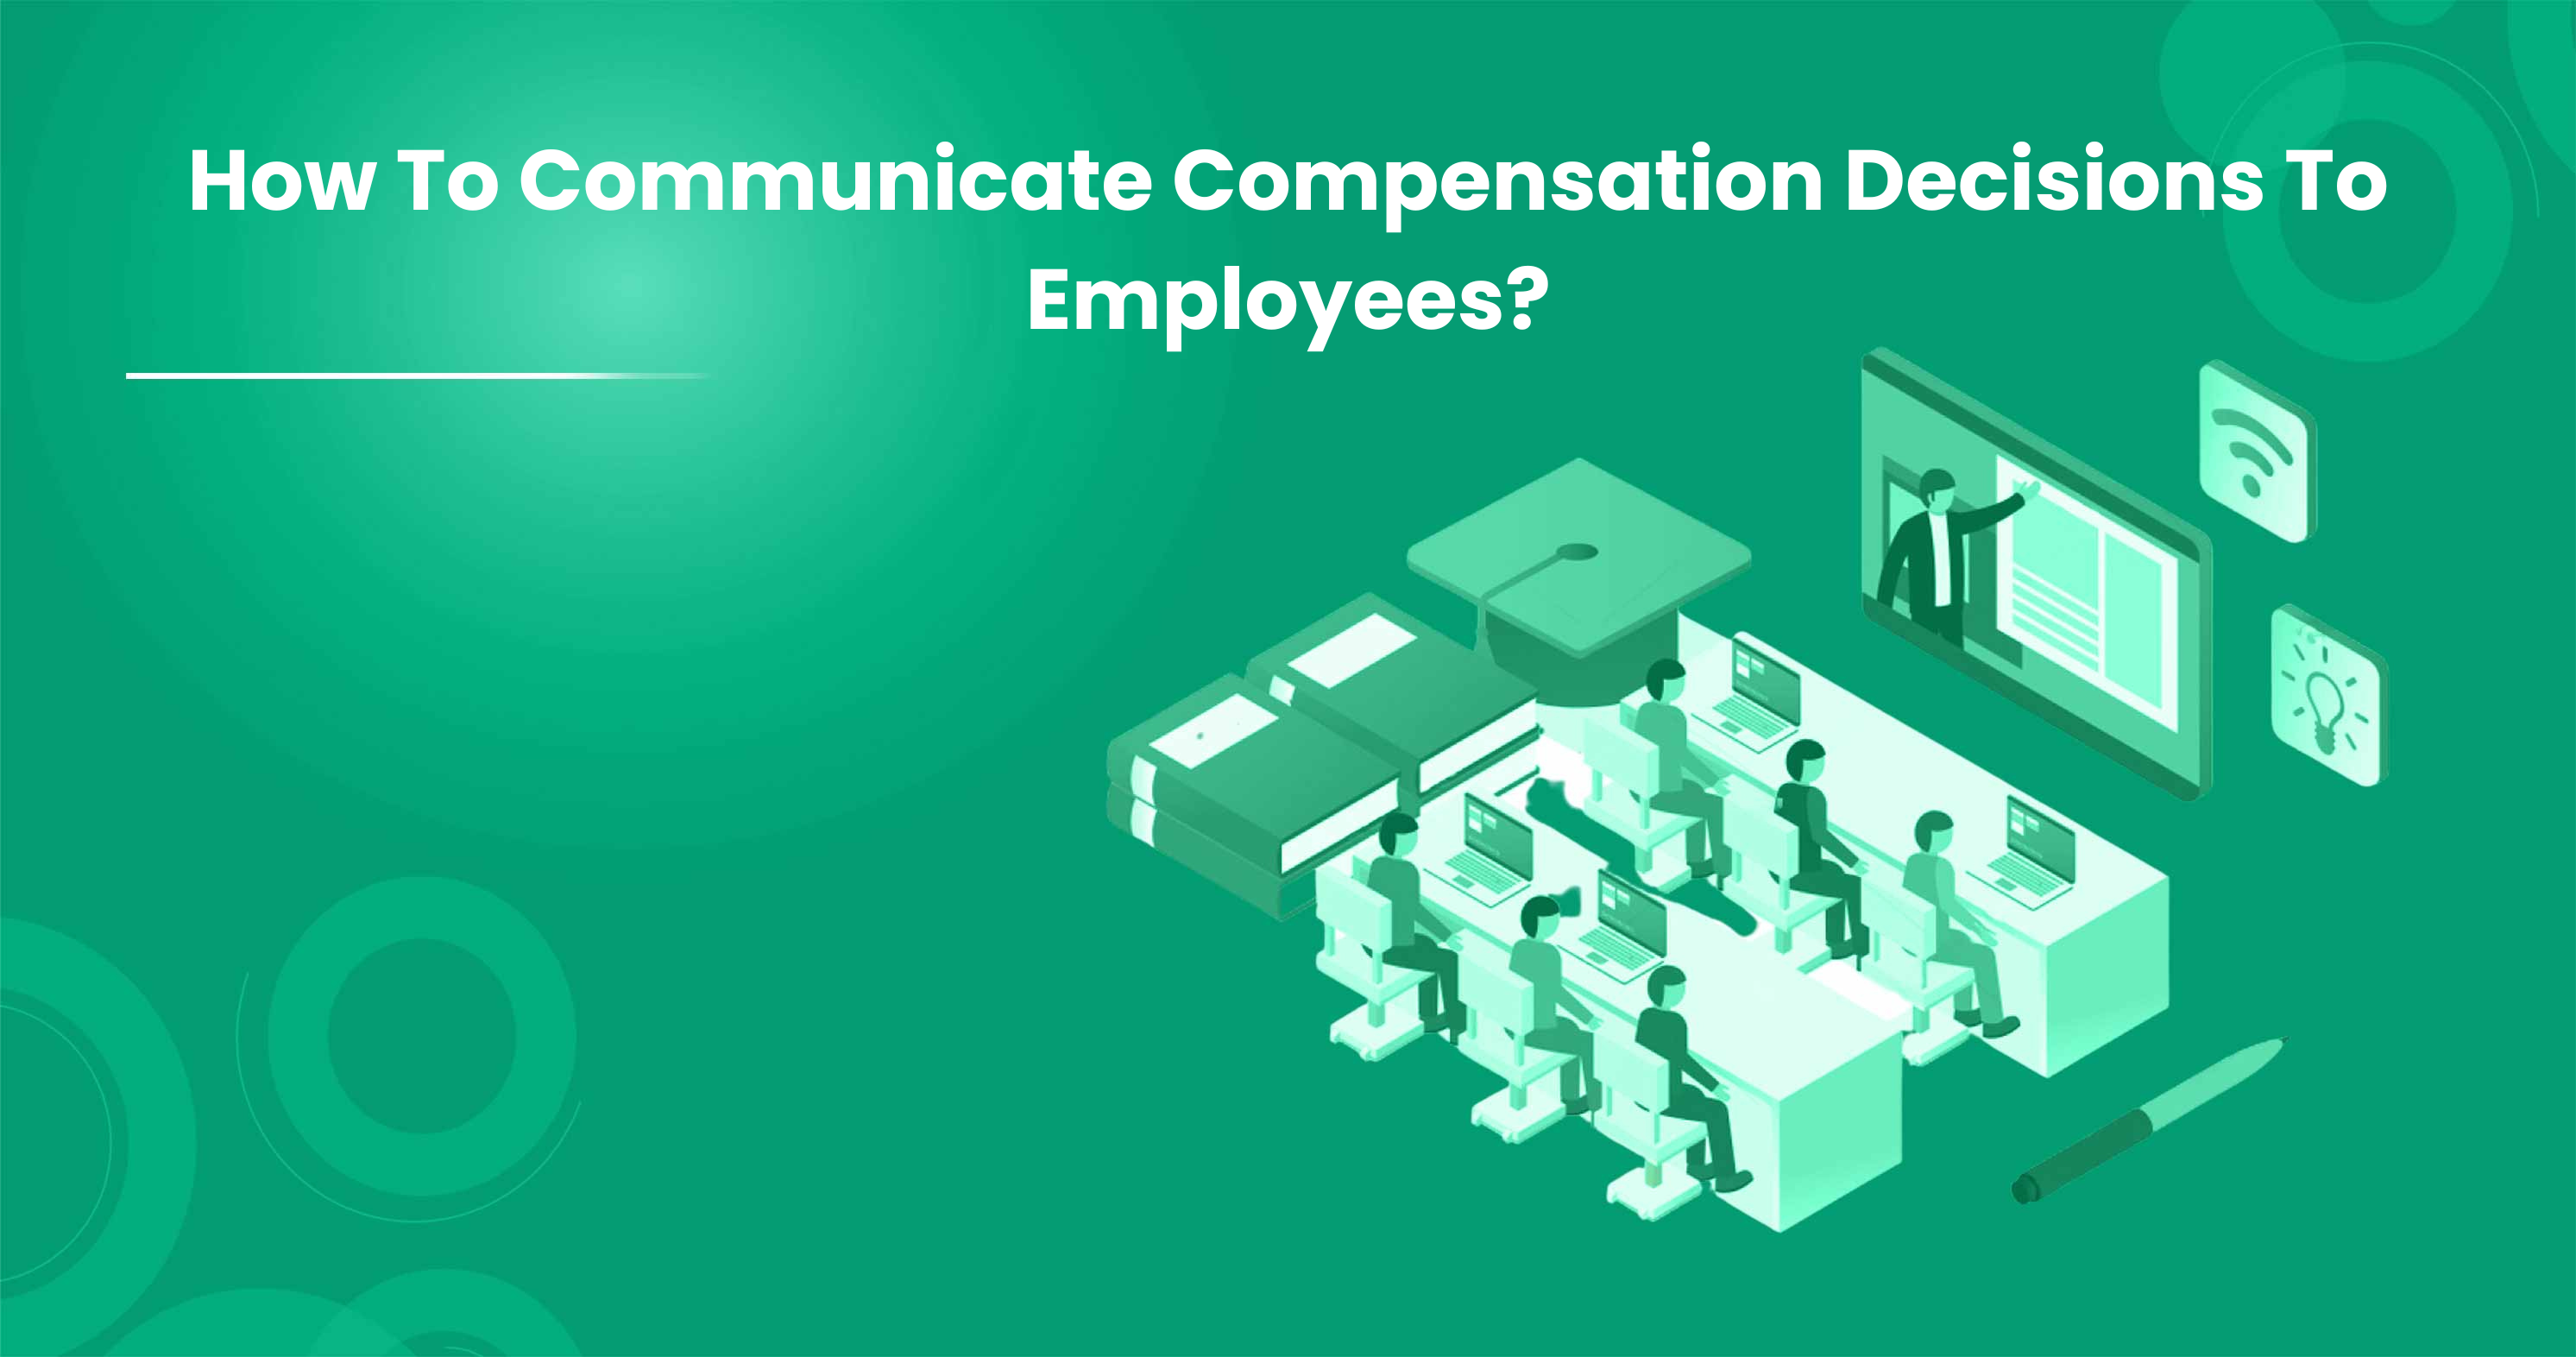 How To Communicate Compensation Decisions To Employees?